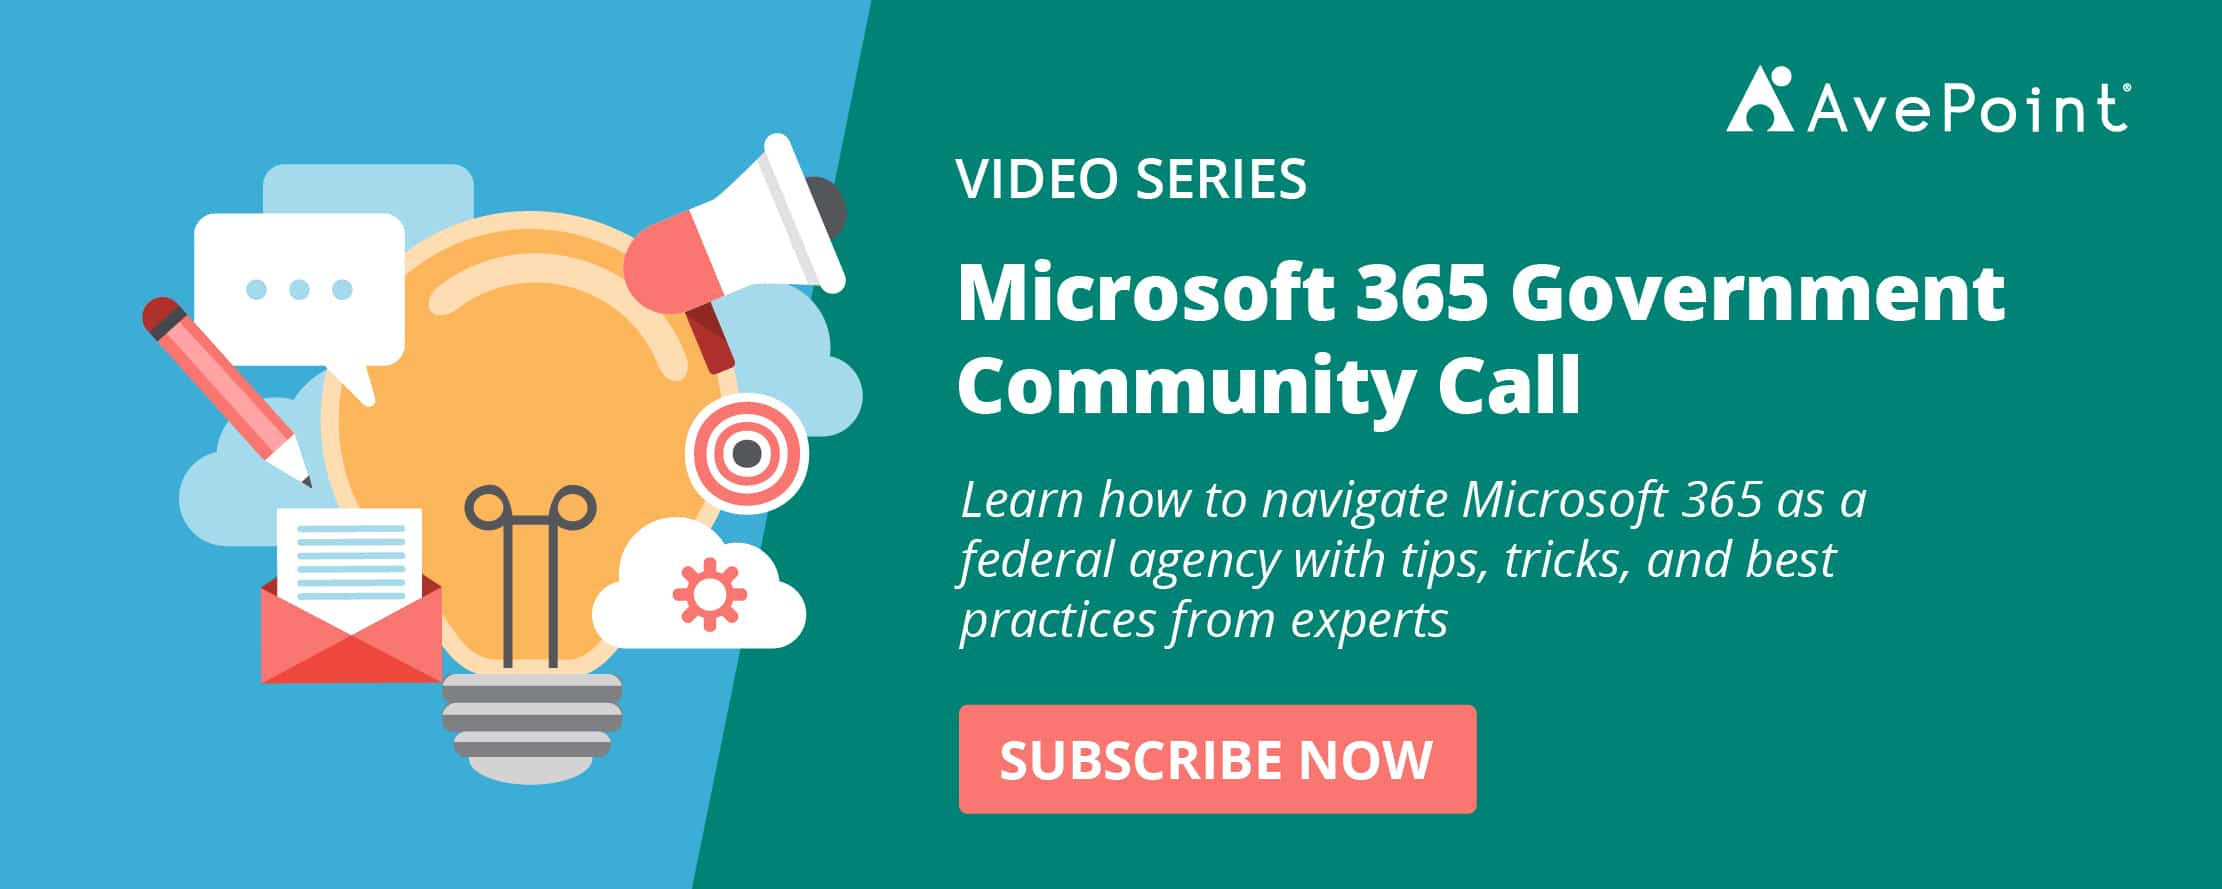 M365-GovCall-subscribe-now